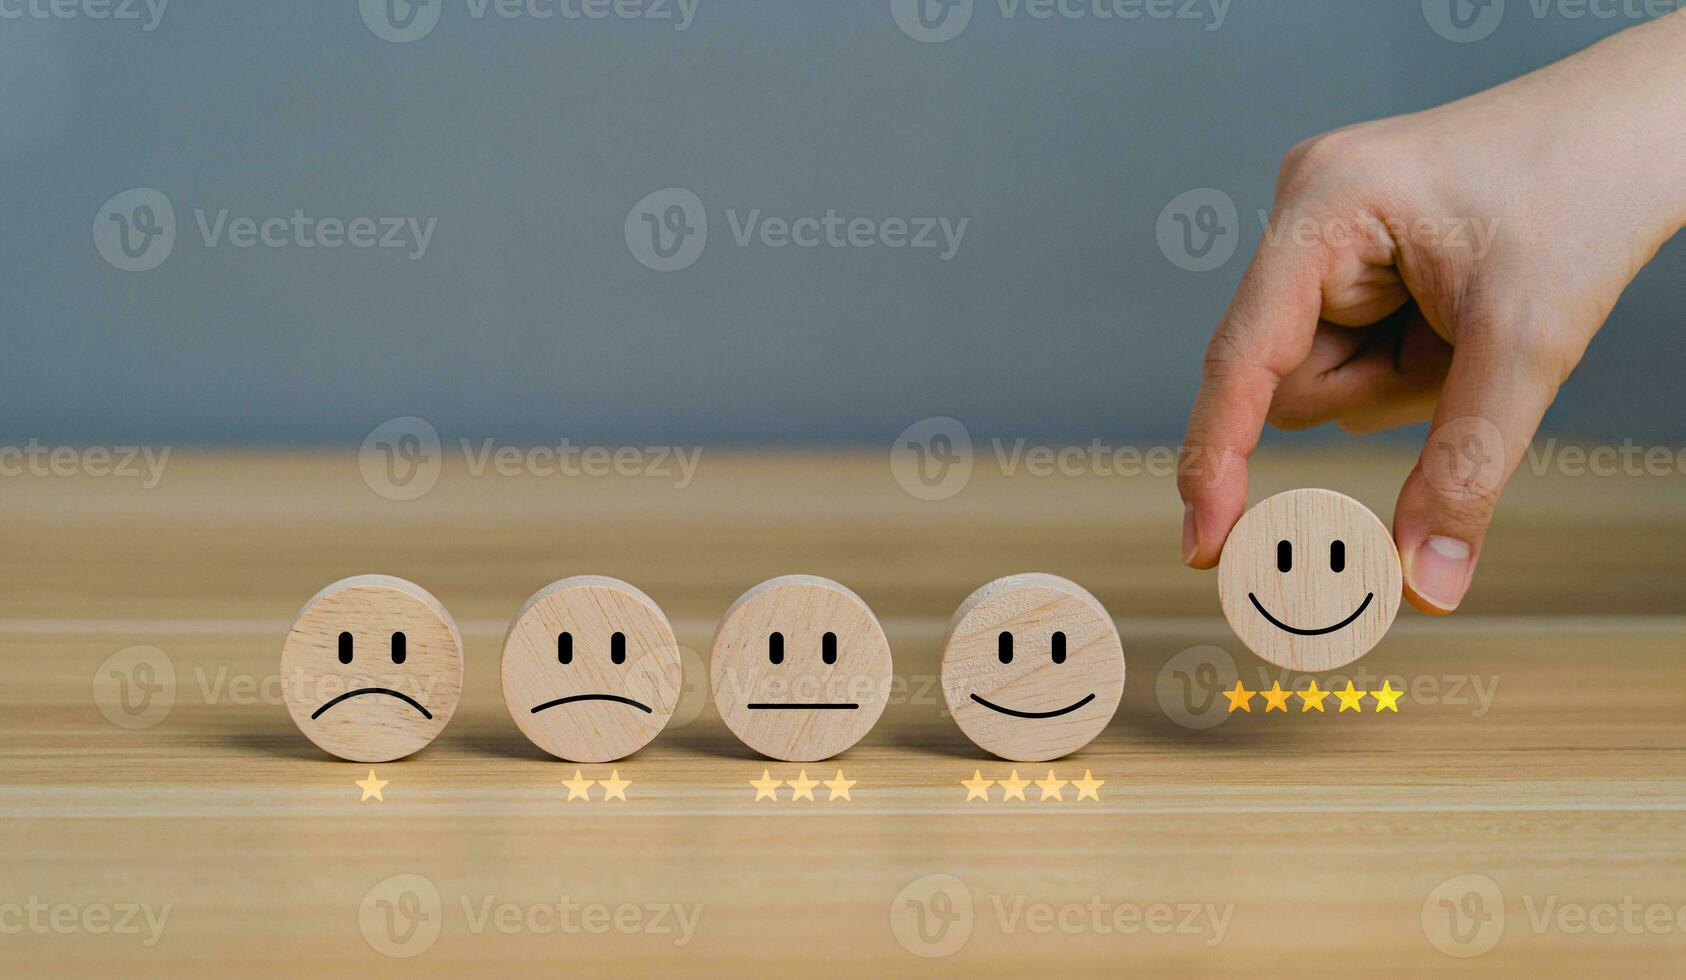 Hand picking happy smiley face icon on circular wooden block, 5 Star Satisfaction. Customer service experience and business satisfaction survey. Rating very impressed. Satisfaction survey concept. photo